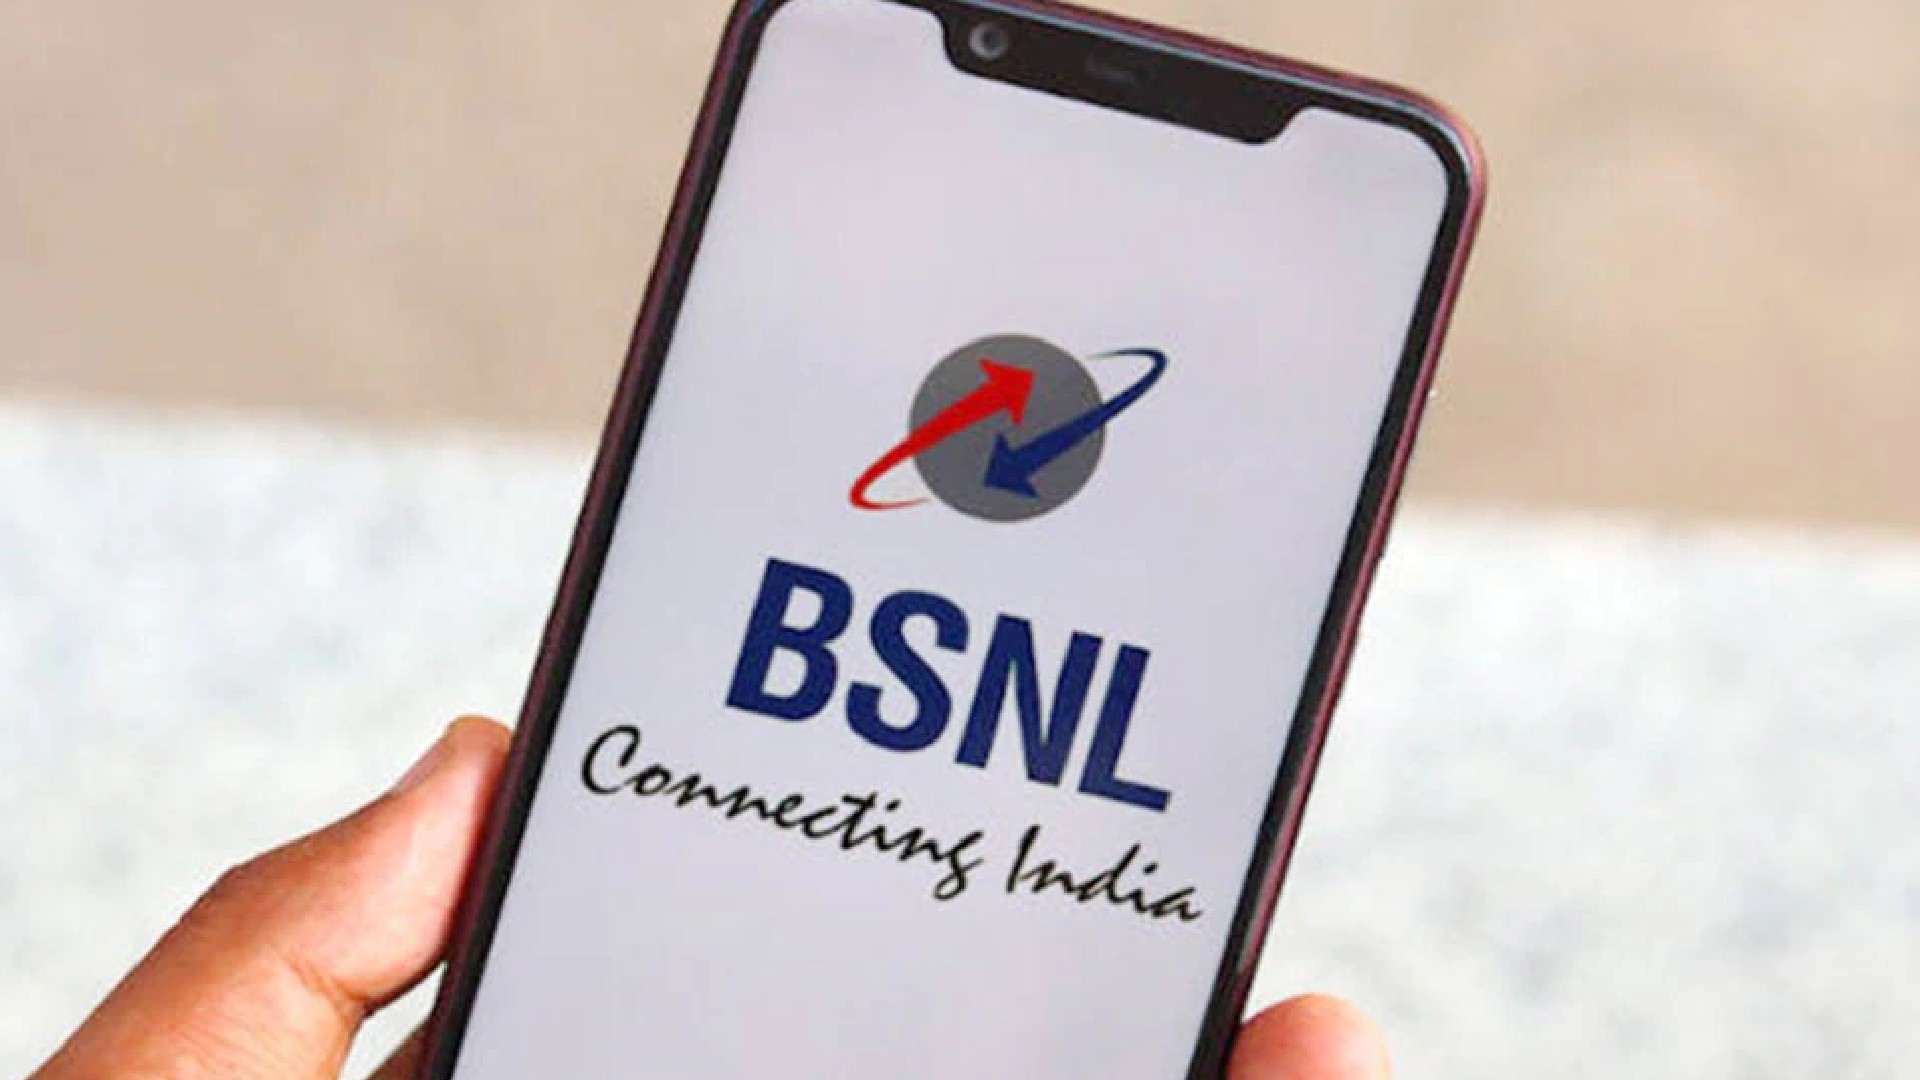 BSNL Starts Price War: Introduces Rs 797 Plan With 365 Days Validity, 2GB Data Per Day, Unlimited Calls!